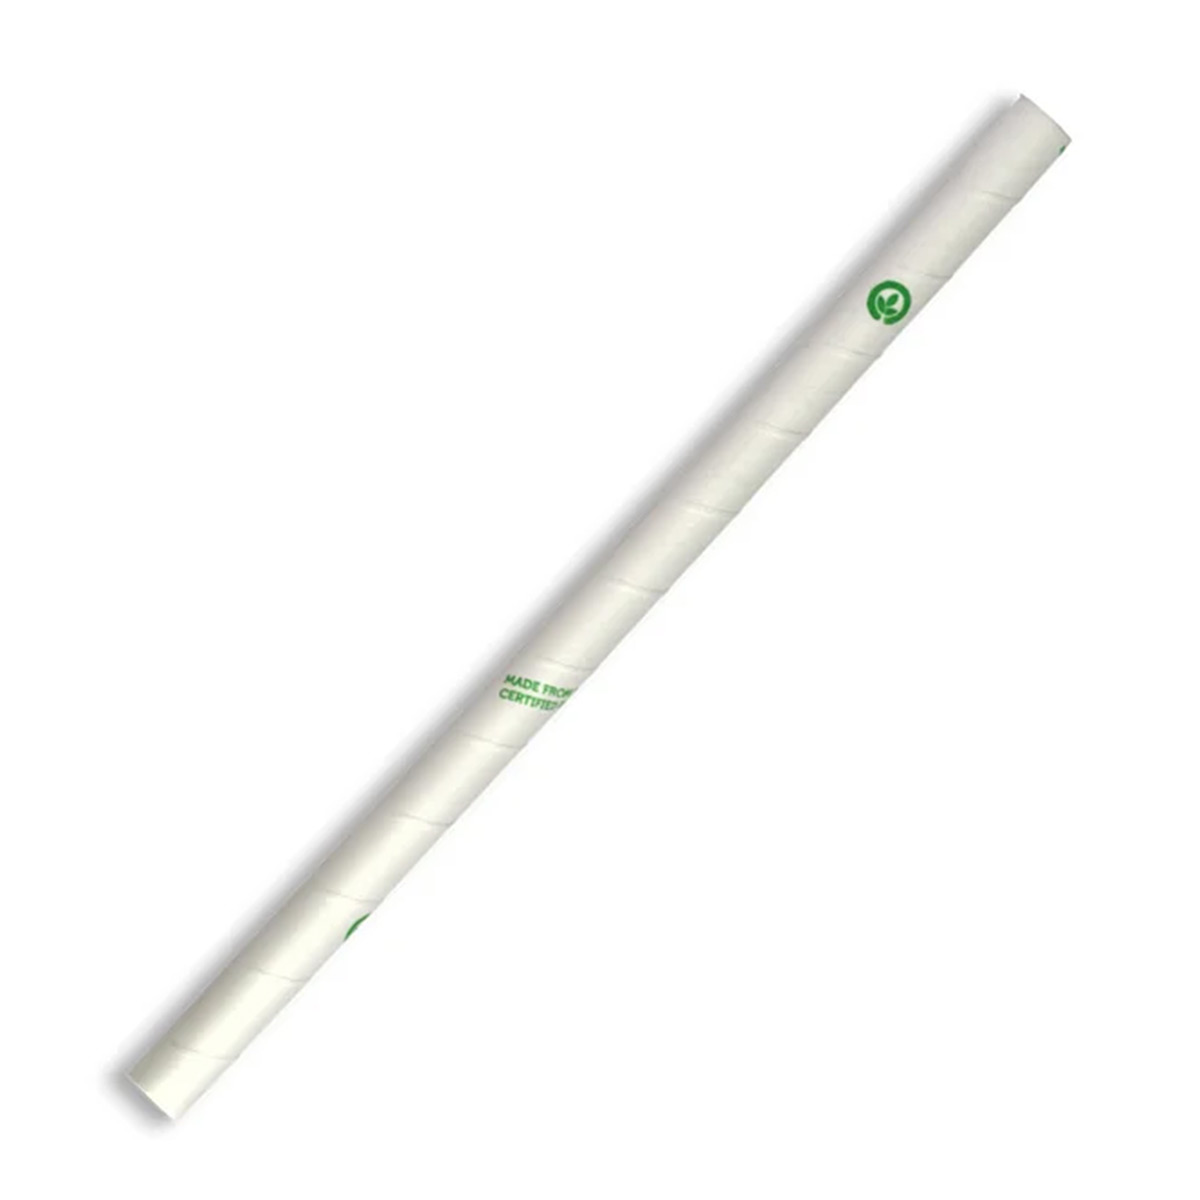 consumables-hospitality-packaging-biopak-white-jumbo-paper-straw-x2500-3-ply-premium-grade-fsc-certified-industrially-compostable-vjs-distributors-hawkes-bay-nz-JP-PBS-10X197-W